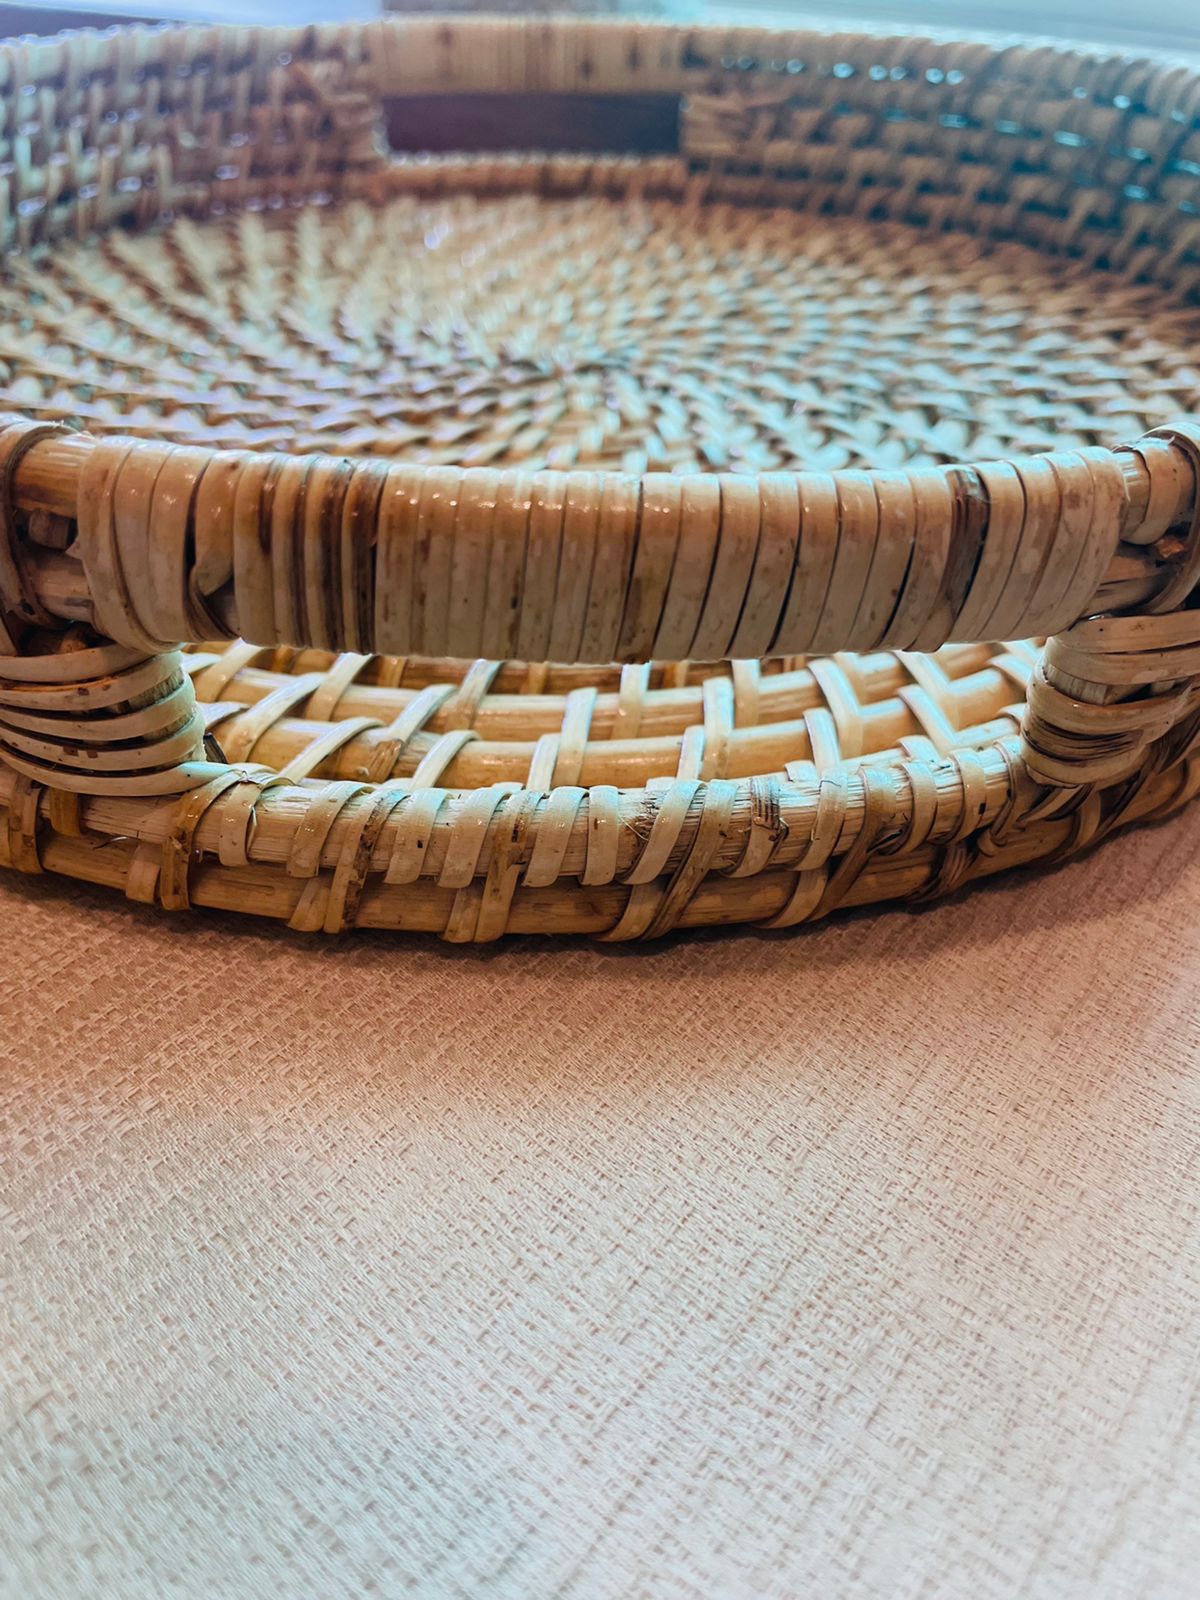 Handwoven Cane Serving Tray With Cut Handle